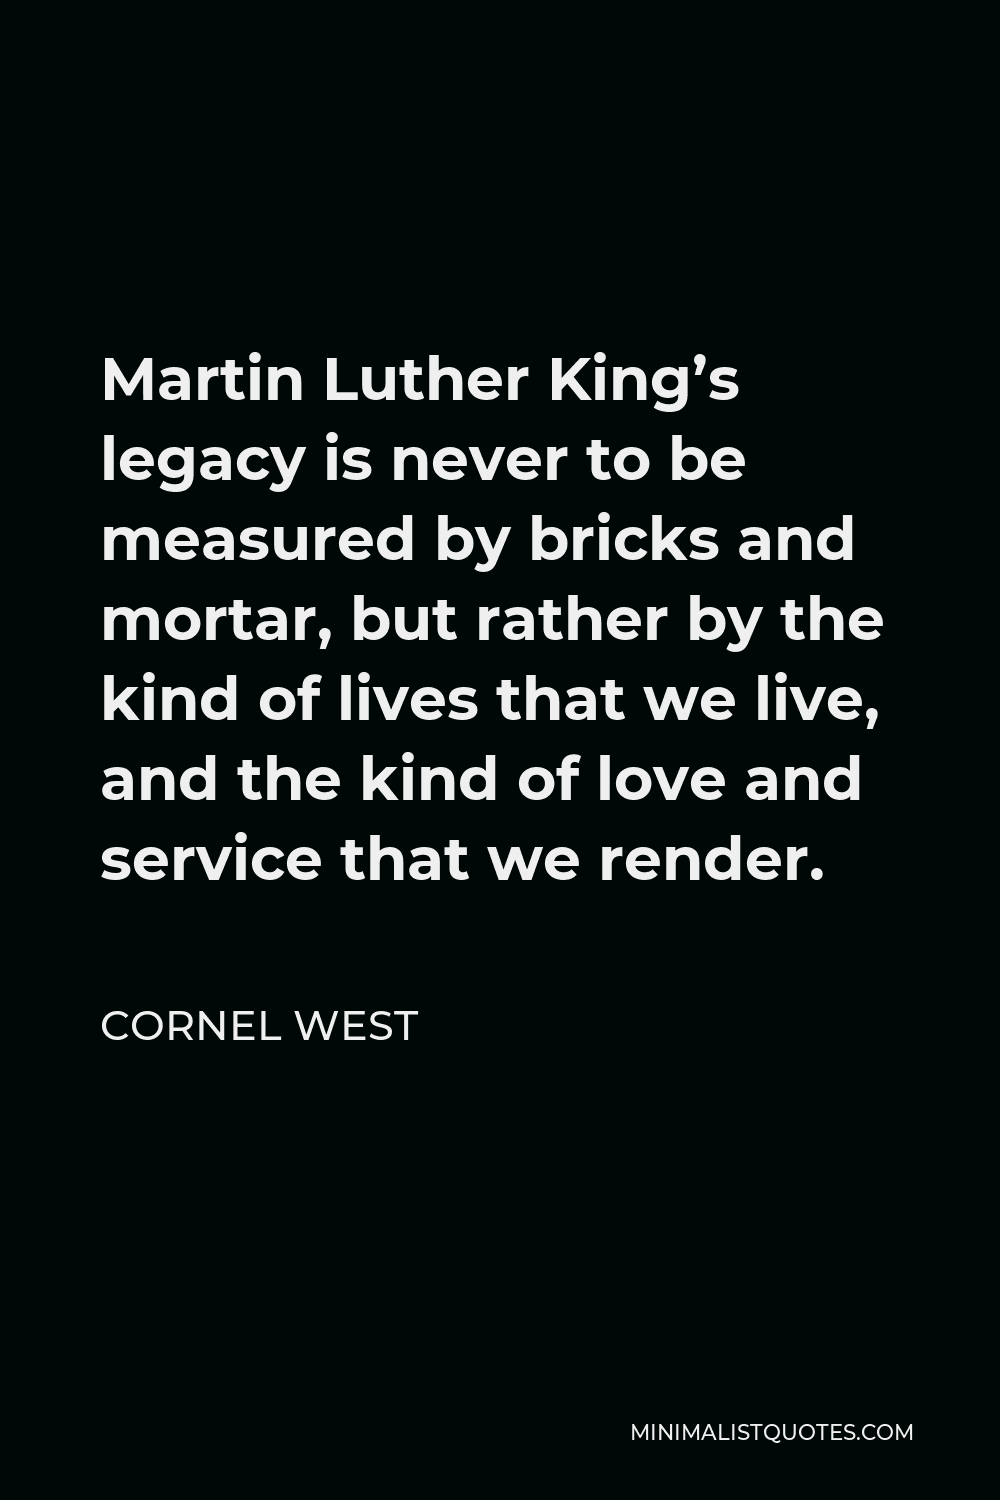 Cornel West Quote - Martin Luther King’s legacy is never to be measured by bricks and mortar, but rather by the kind of lives that we live, and the kind of love and service that we render.